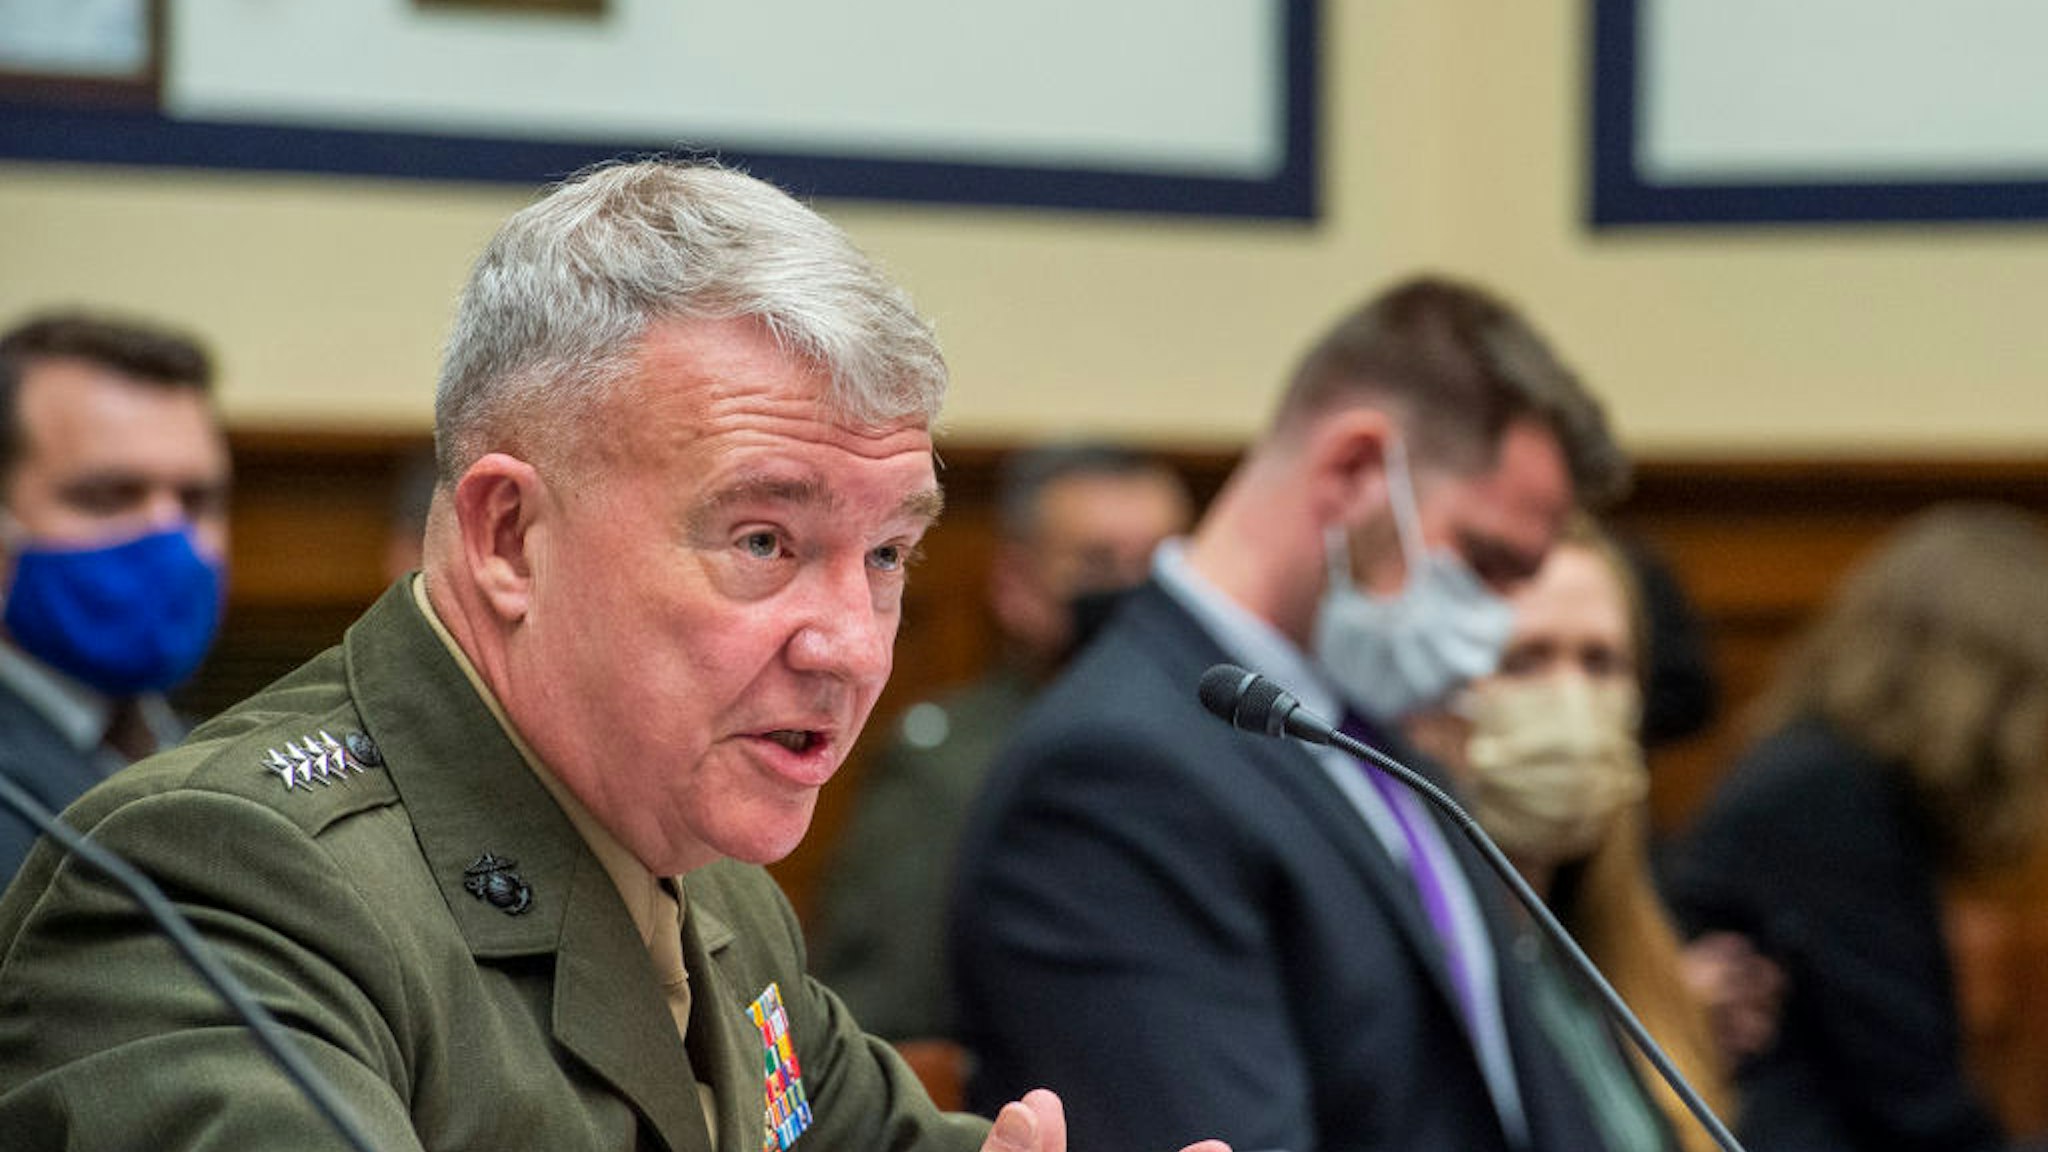 General Kenneth McKenzie Jr., USMC Commander, U.S. Central Command responds to questions during a House Armed Services Committee hearing on “Ending the U.S. Military Mission in Afghanistan” in the Rayburn House Office Building in Washington, DC, Wednesday, September 29, 2021. Credit: Rod Lamkey / Pool via CNP